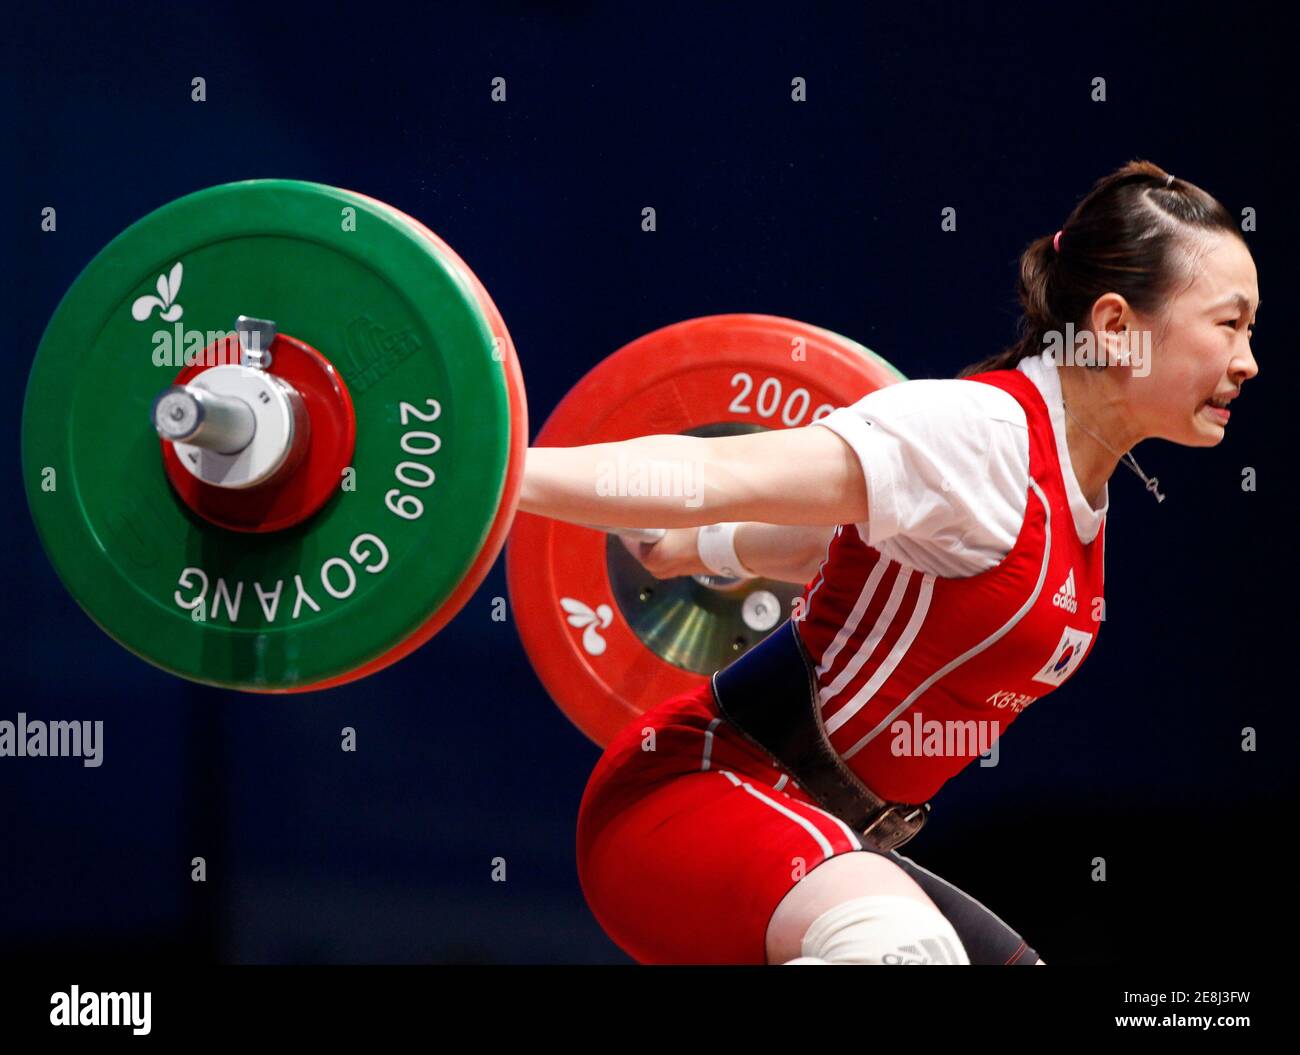 Yoon Jin-hee of South Korea drops the weights as she makes an unsuccessful attempt in the women's 53kg Group A weightlifting snatch competition at the World Weightlifting Championship in Goyang, north of Seoul, November 22, 2009.  REUTERS/Jo Yong-Hak (SOUTH KOREA SPORT WEIGHTLIFTING) Stock Photo